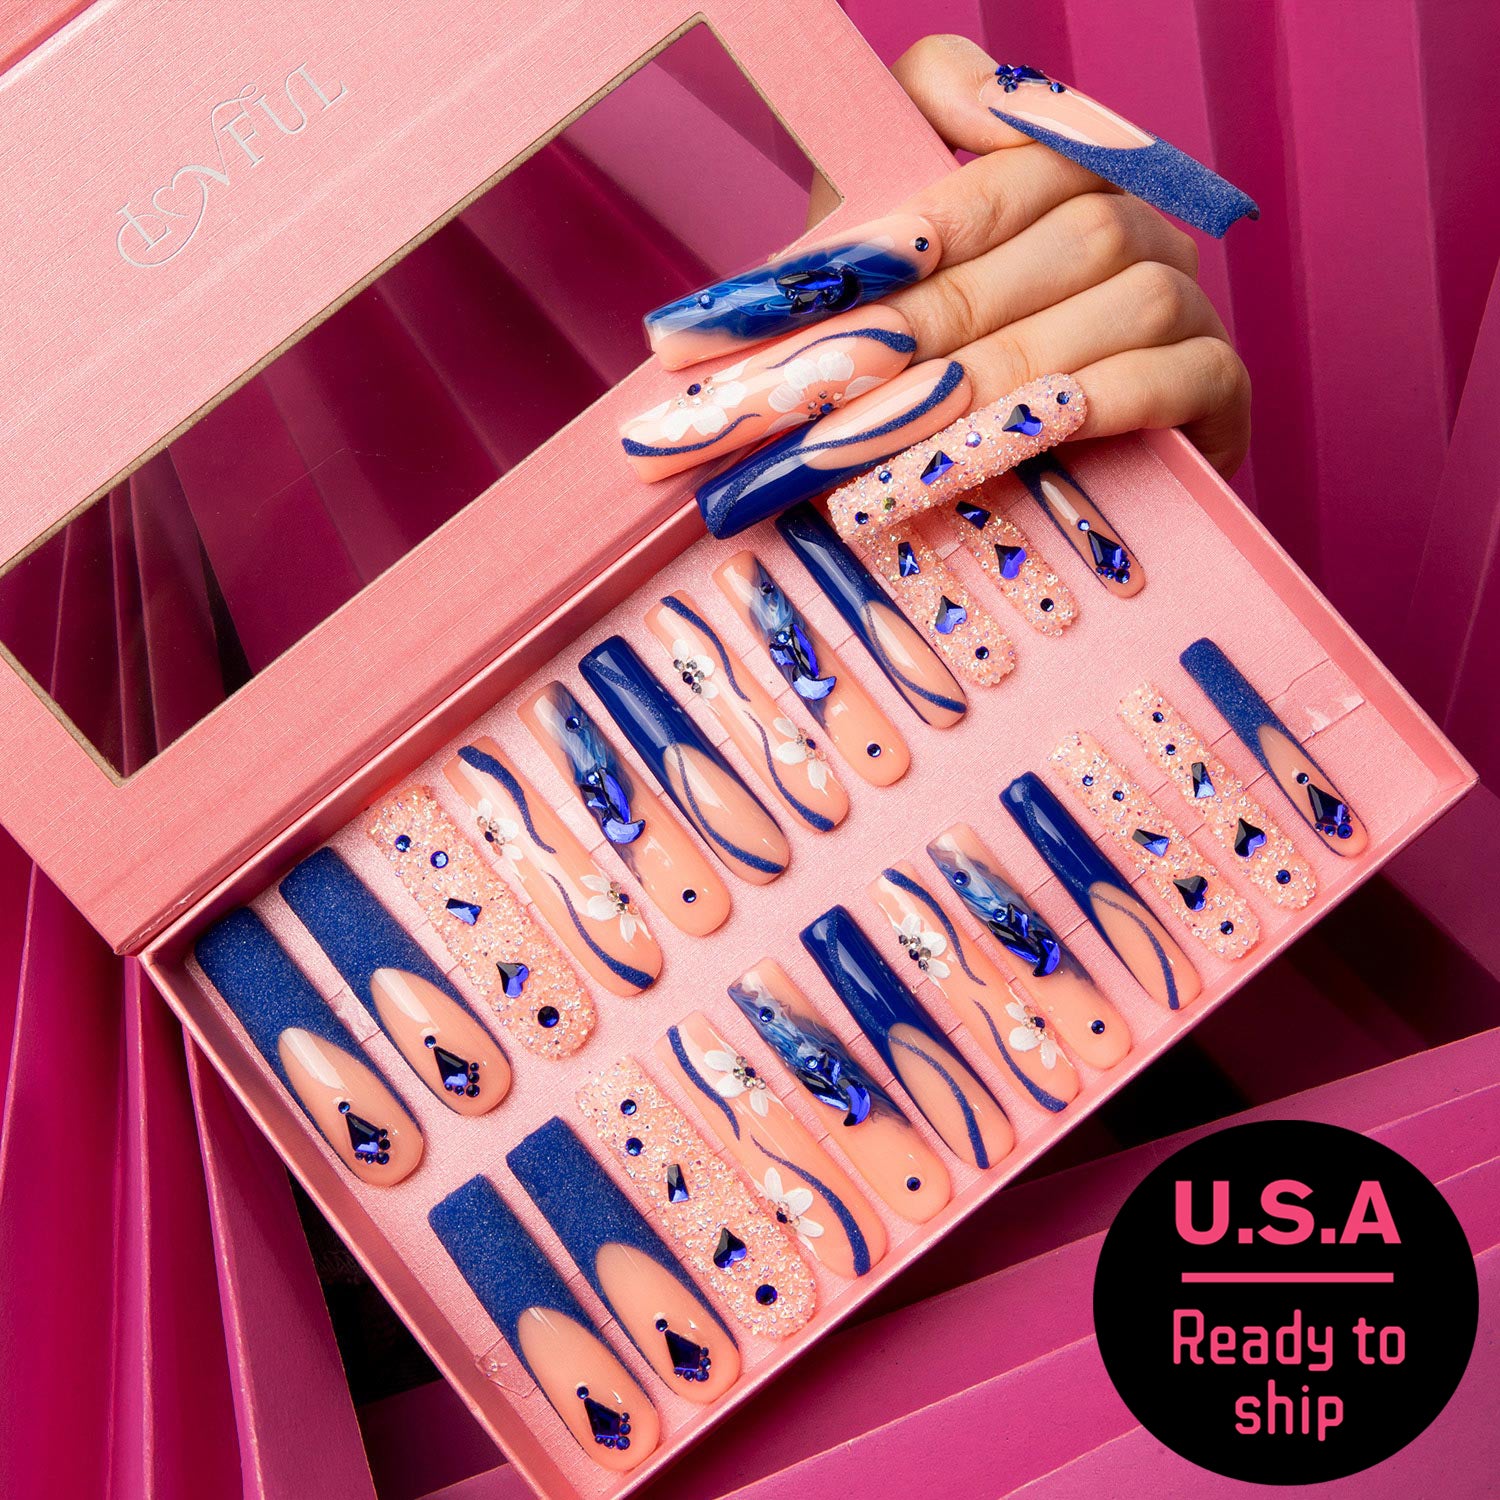 24-piece set of Lovful 'Blue Suede' press-on nails featuring blue French tips with curvy lines, crystals, and blue heart-shaped gems, in a pink box with a hand showing the nails and a 'U.S.A Ready to ship' sticker